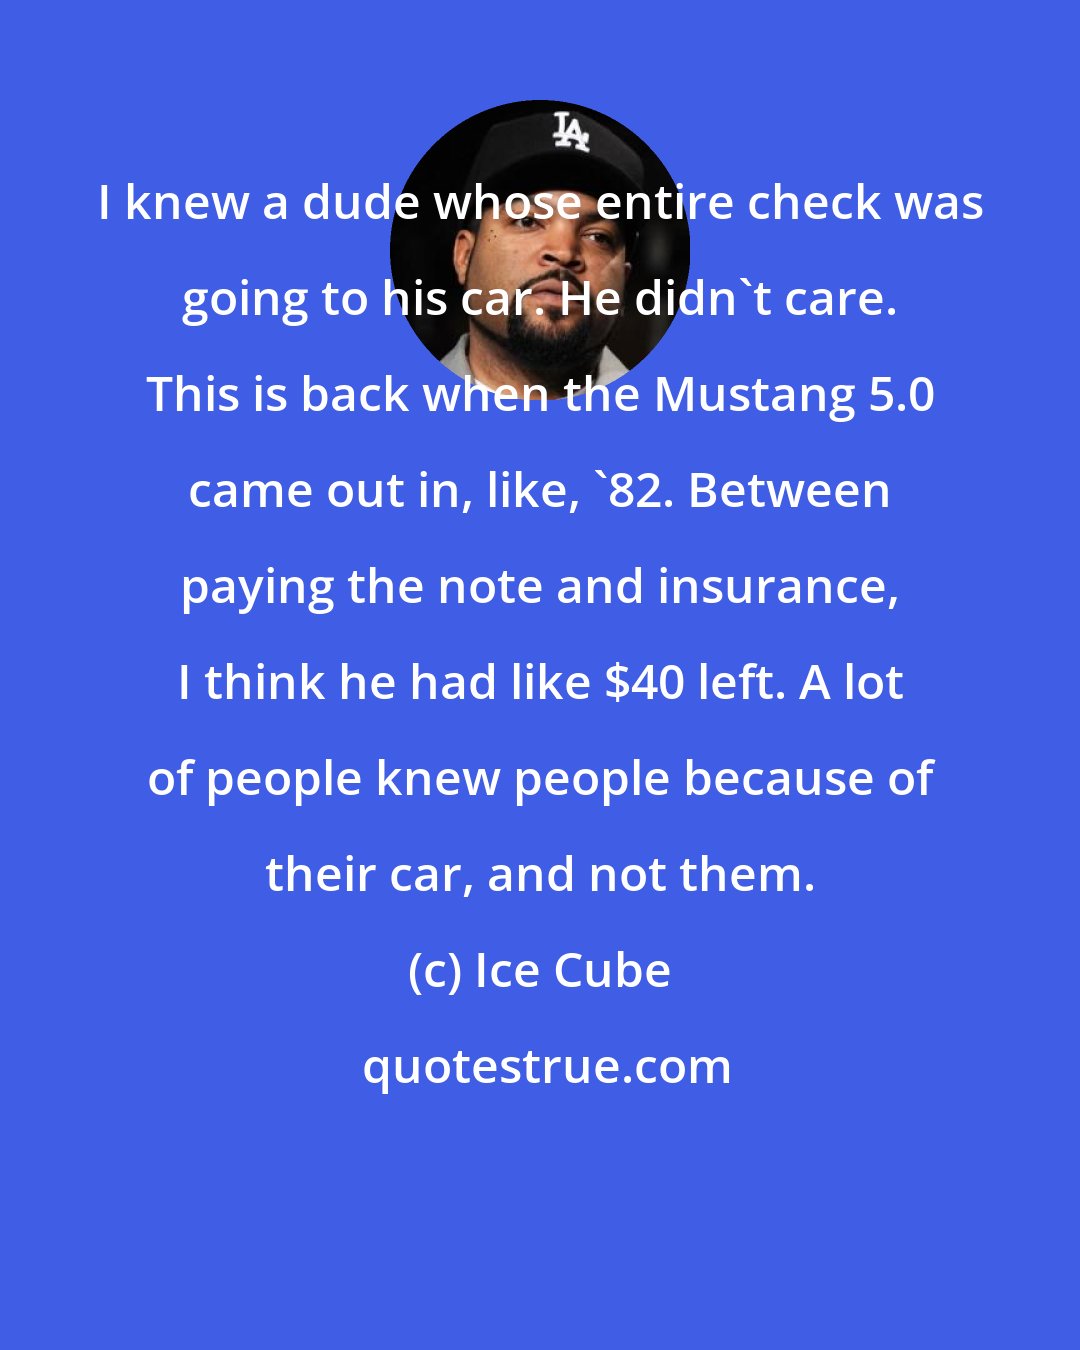 Ice Cube: I knew a dude whose entire check was going to his car. He didn't care. This is back when the Mustang 5.0 came out in, like, '82. Between paying the note and insurance, I think he had like $40 left. A lot of people knew people because of their car, and not them.